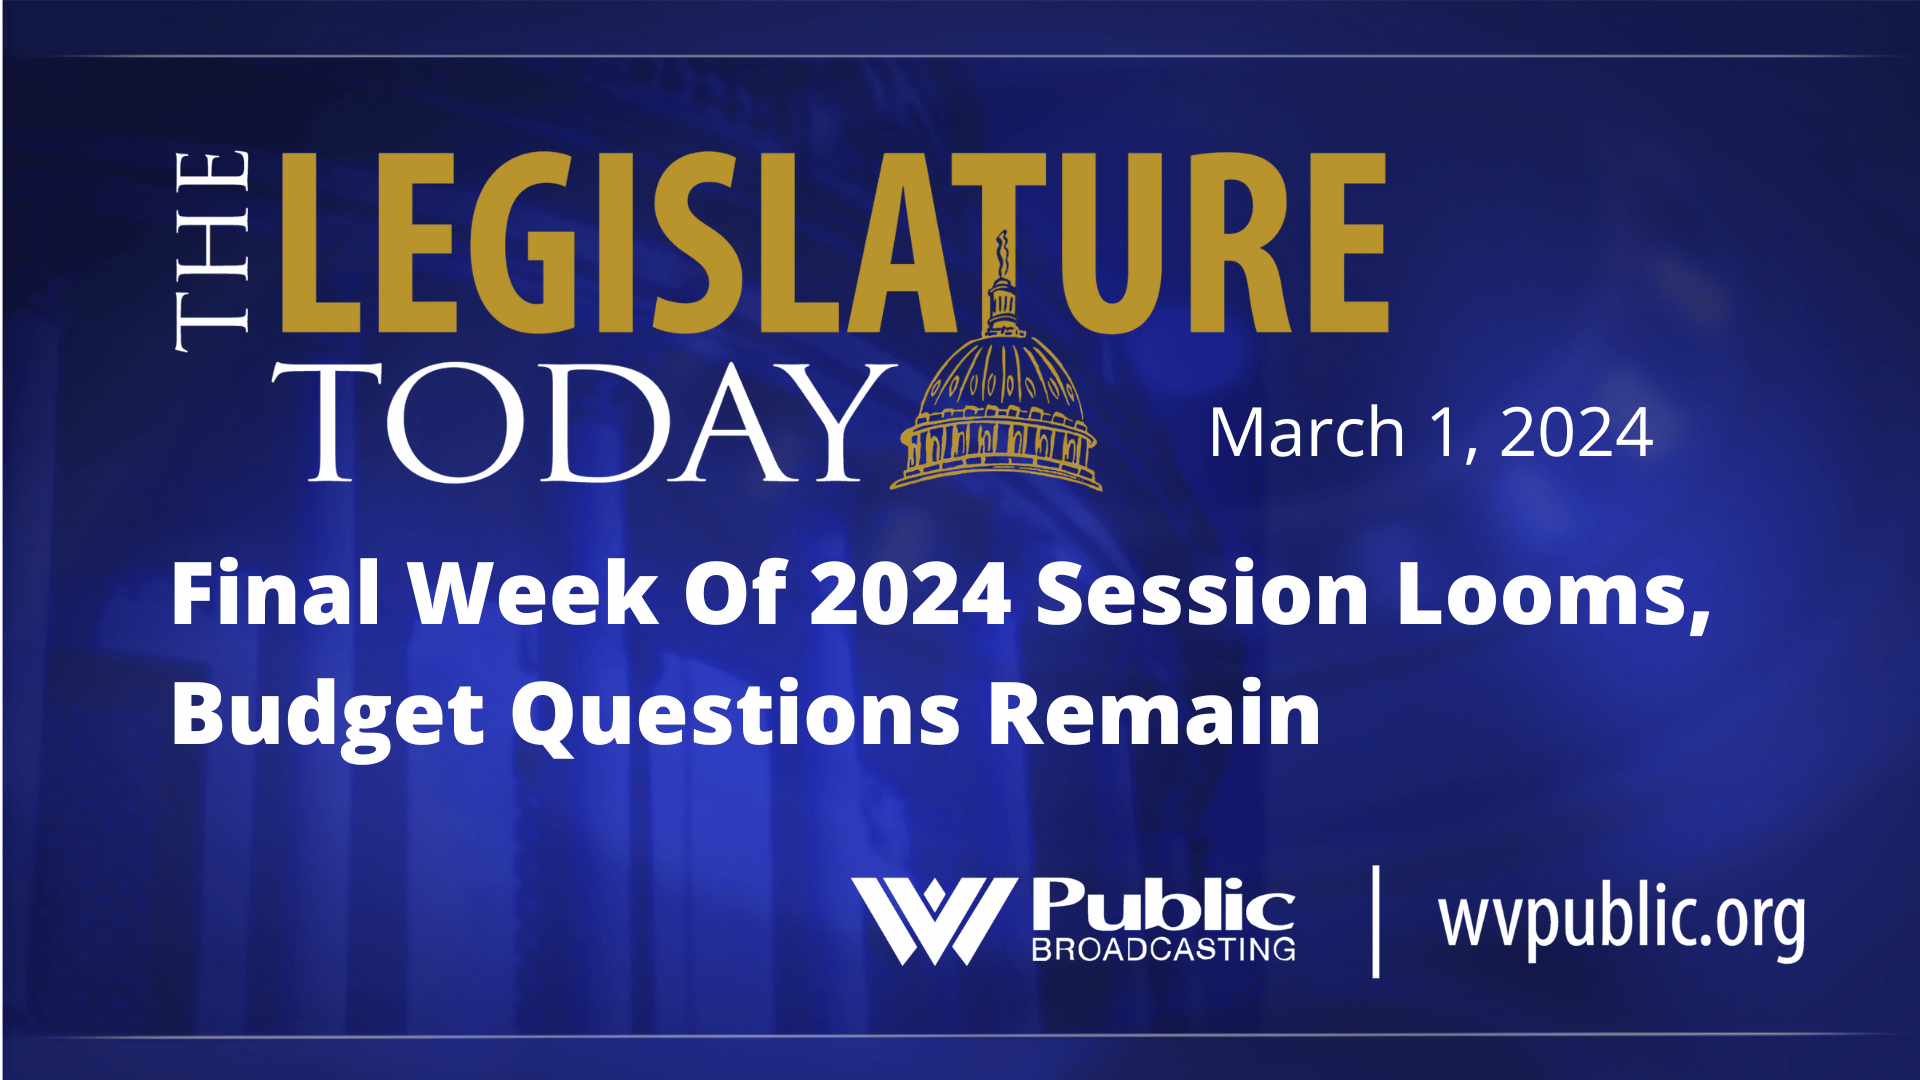 Final Week Of 2024 Session Looms, Budget Questions Remain